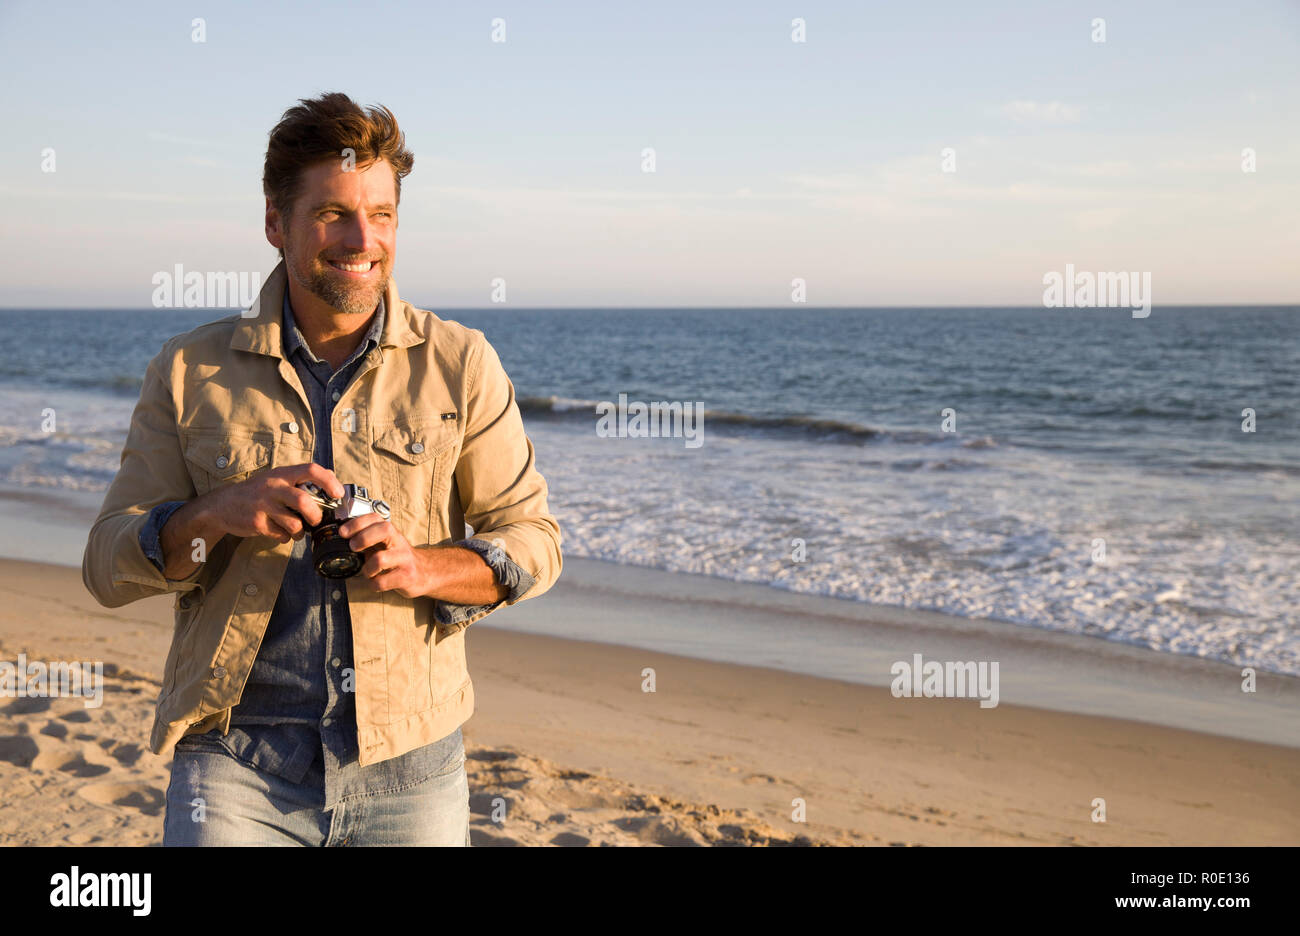 Mi Portrait of Mid-Adult Man with Camera at Beach Banque D'Images